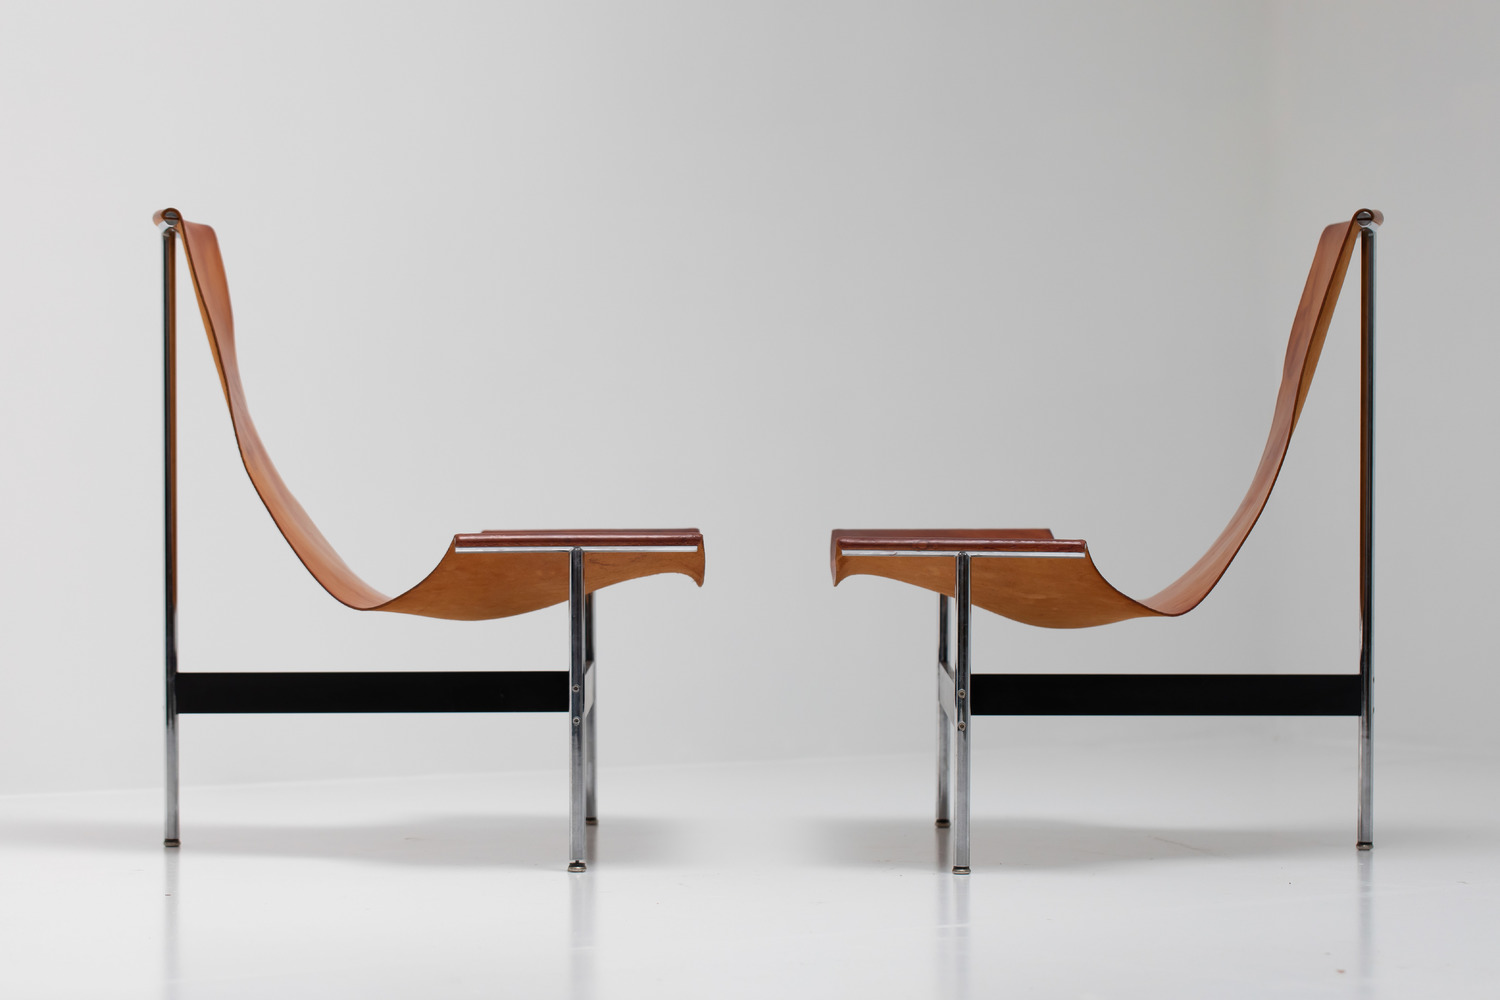 William Katavolos for Laverne International 'TH-15' Lounge Chairs